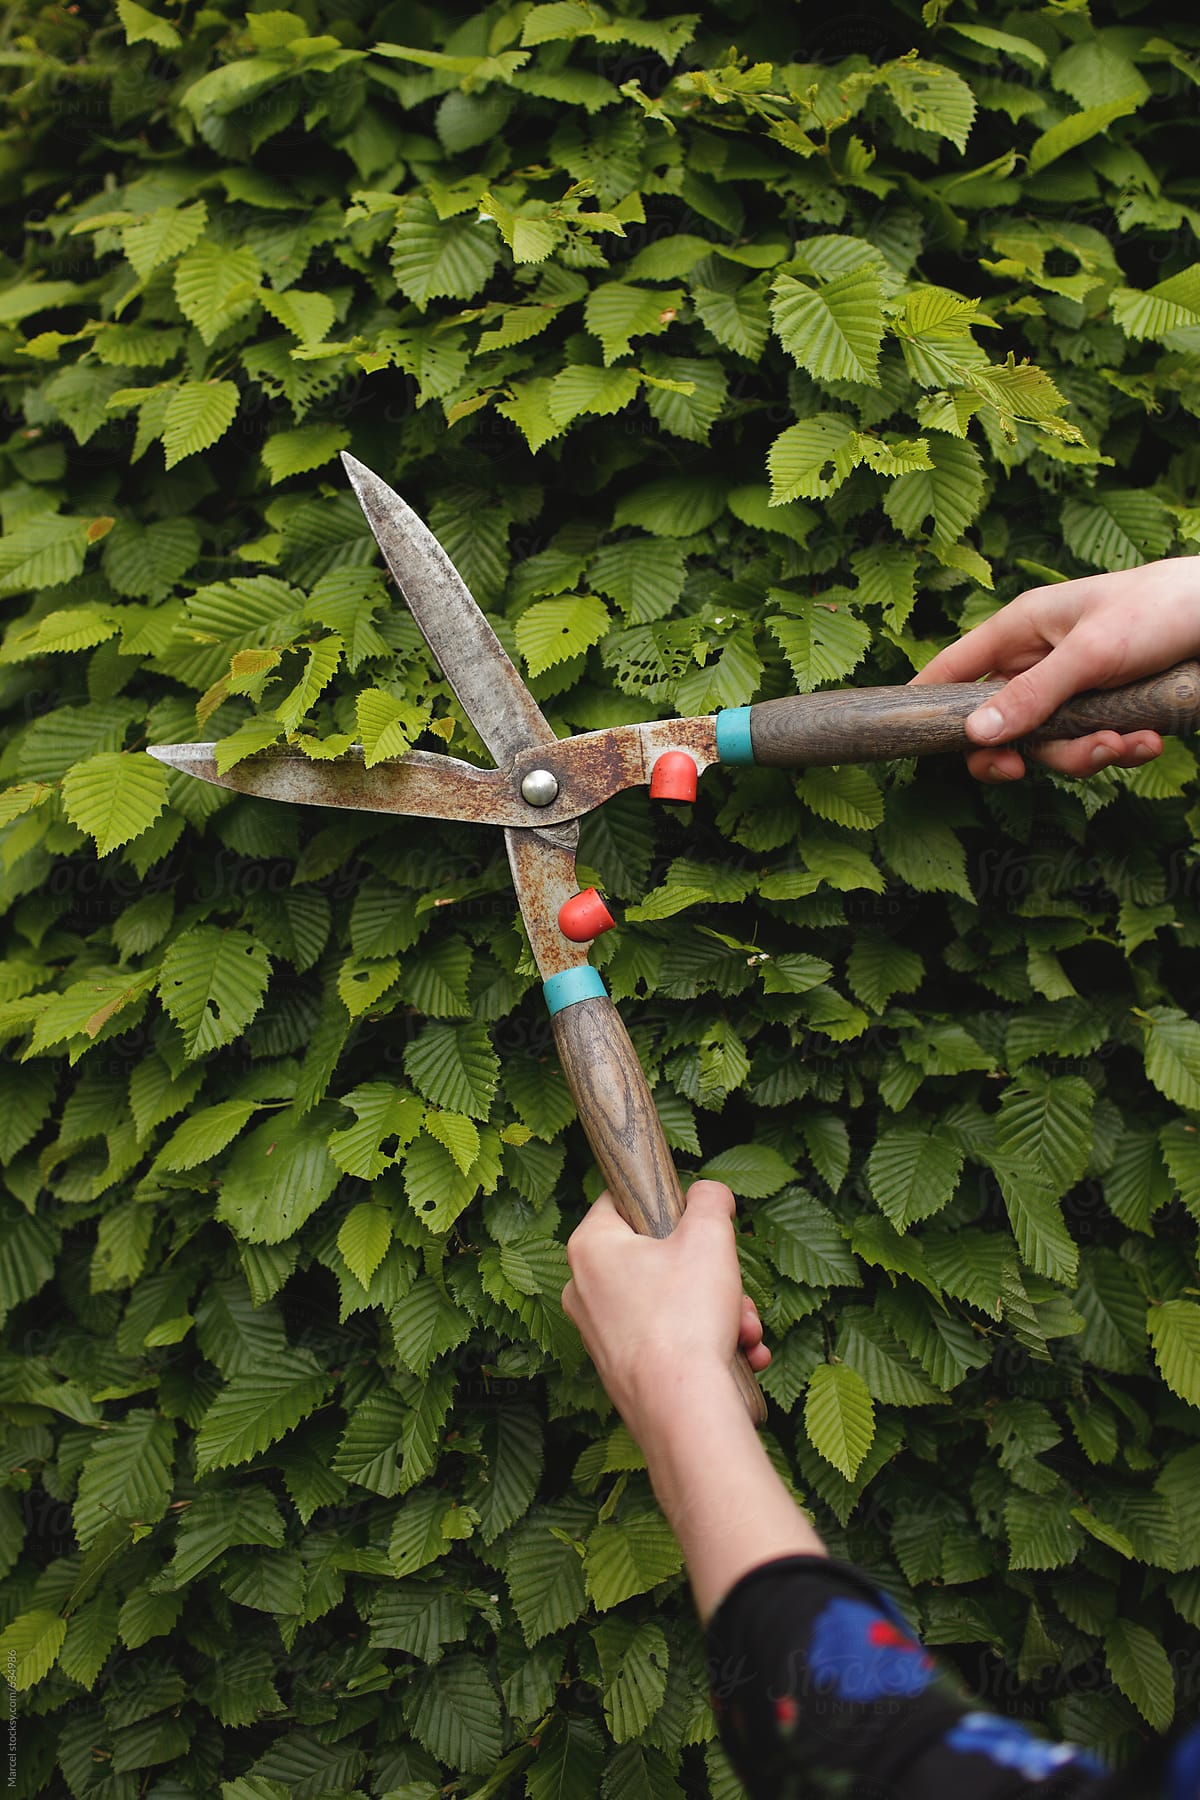 Trimming the hedge